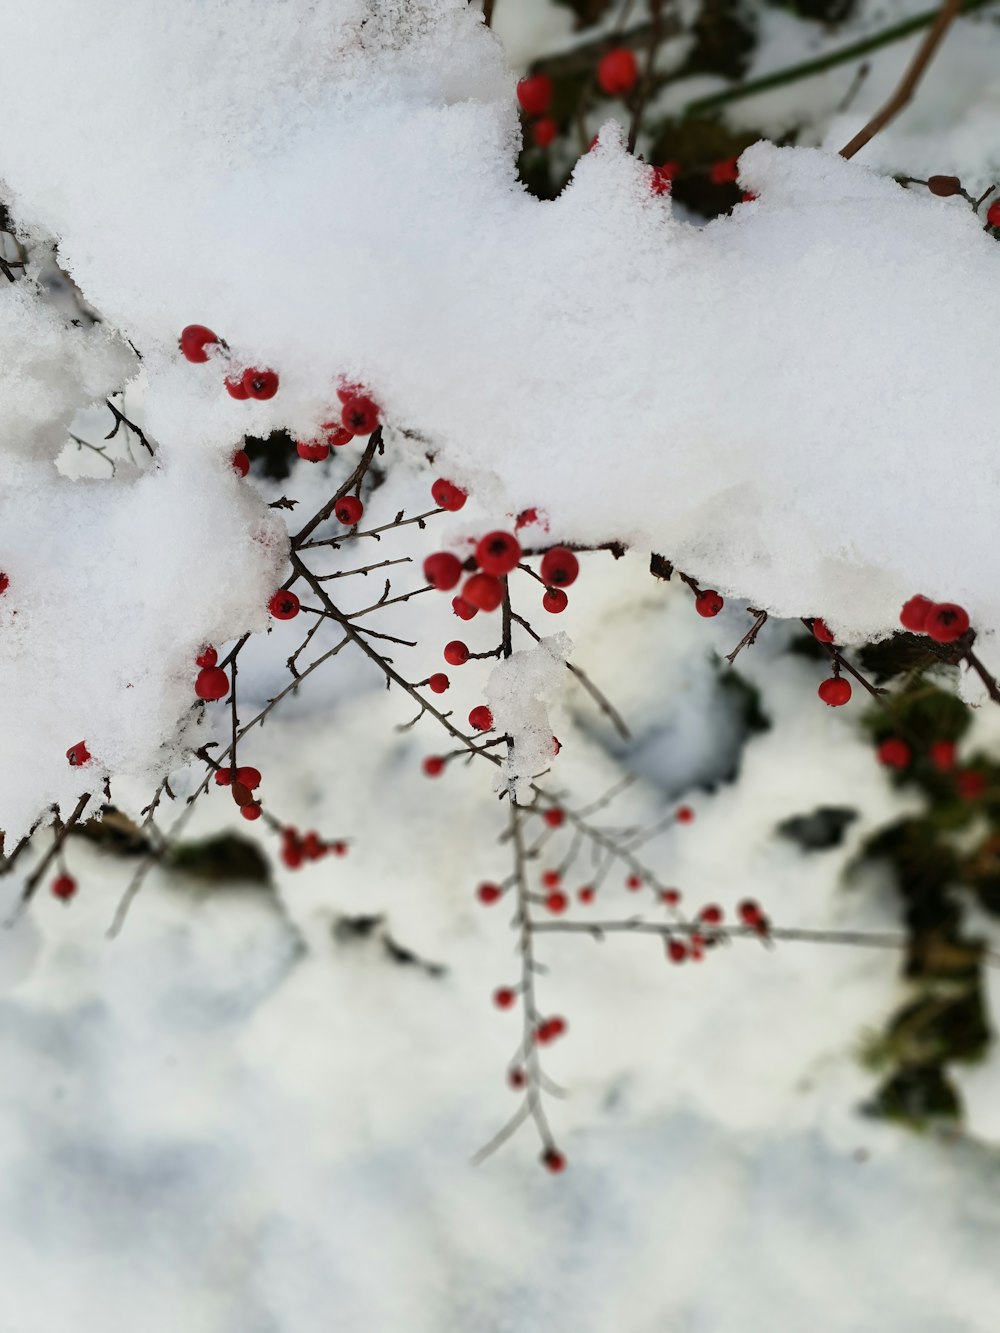 red round fruits covered with snow